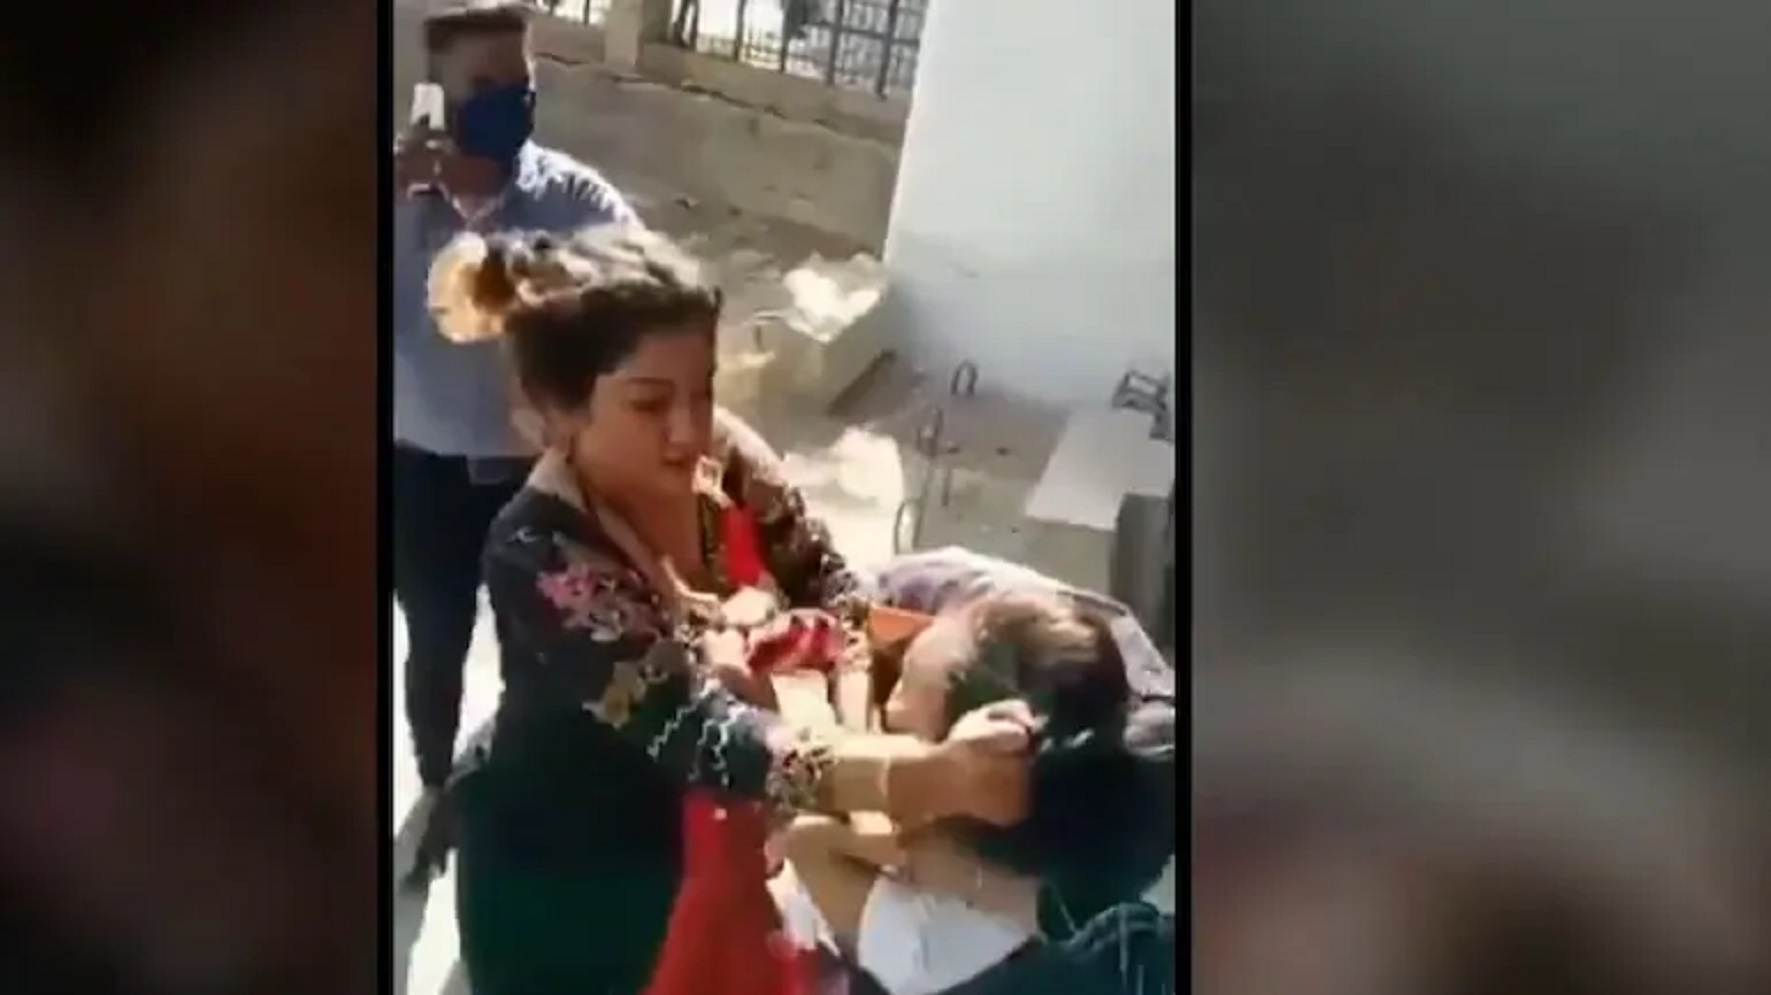 Mumbai Woman Punches BMC Worker After Being Fined For Not Wearing A Mask [Video]